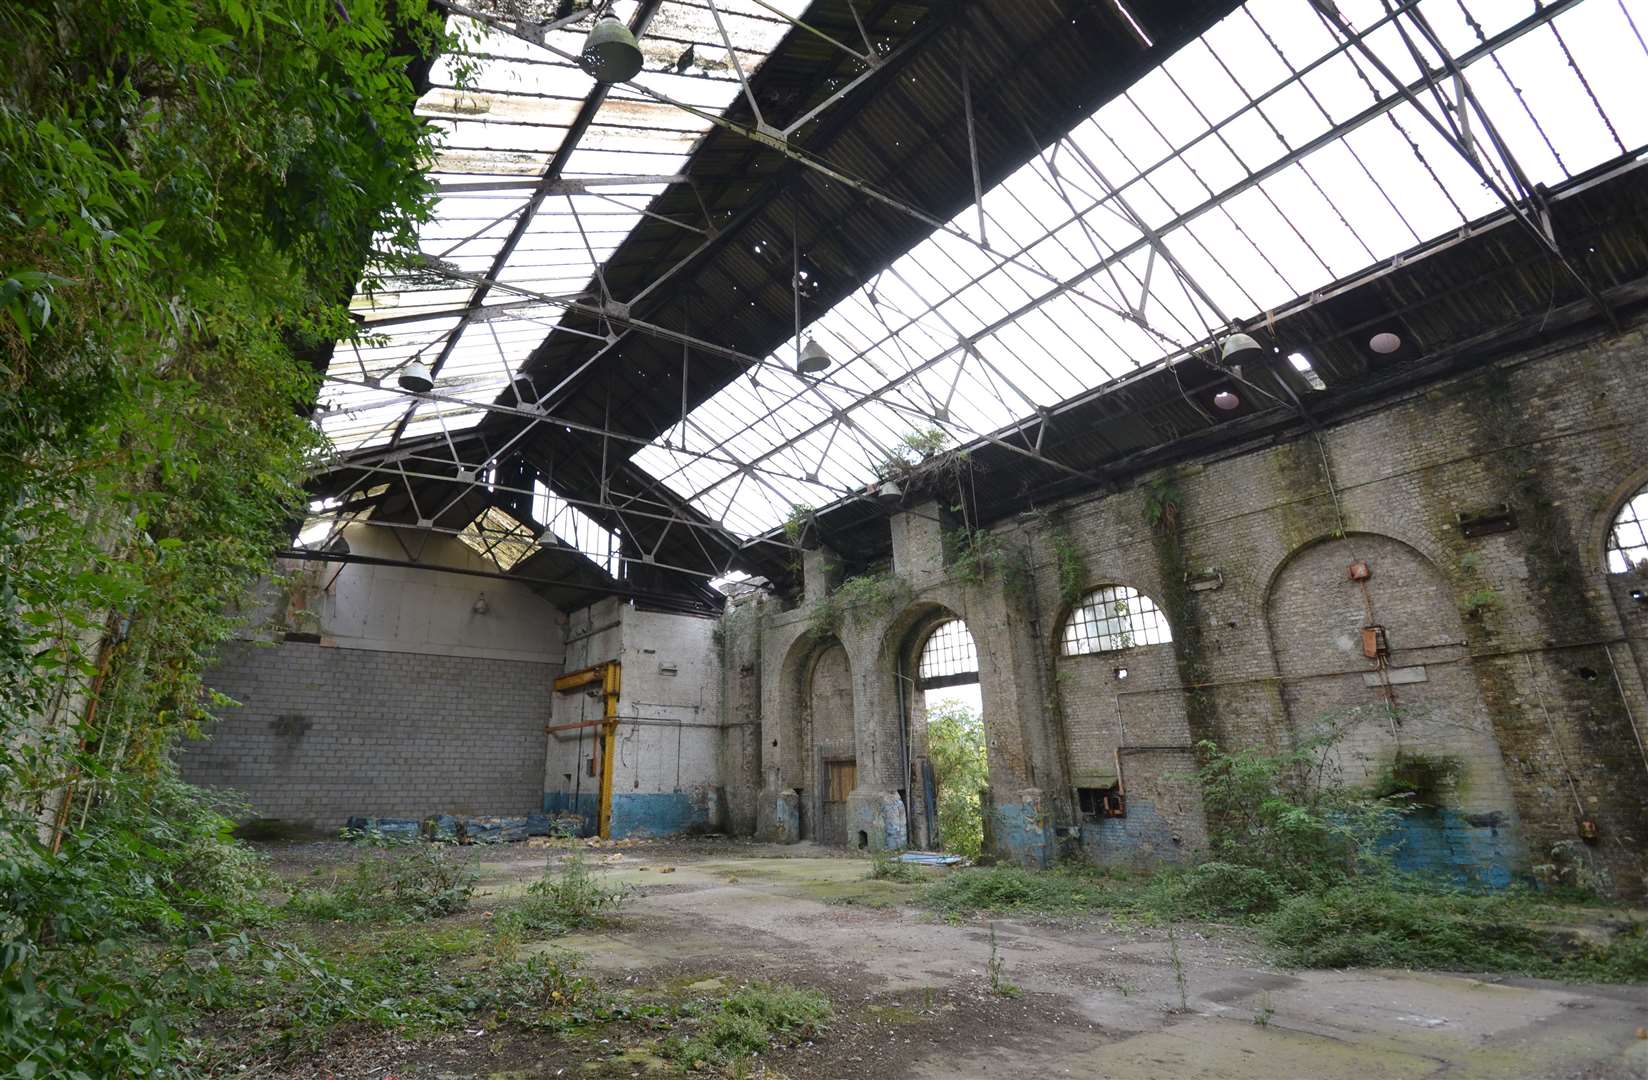 The derelict and rubble-strewn rail works still has signs of its former glory days. Pictures by Steve Salter